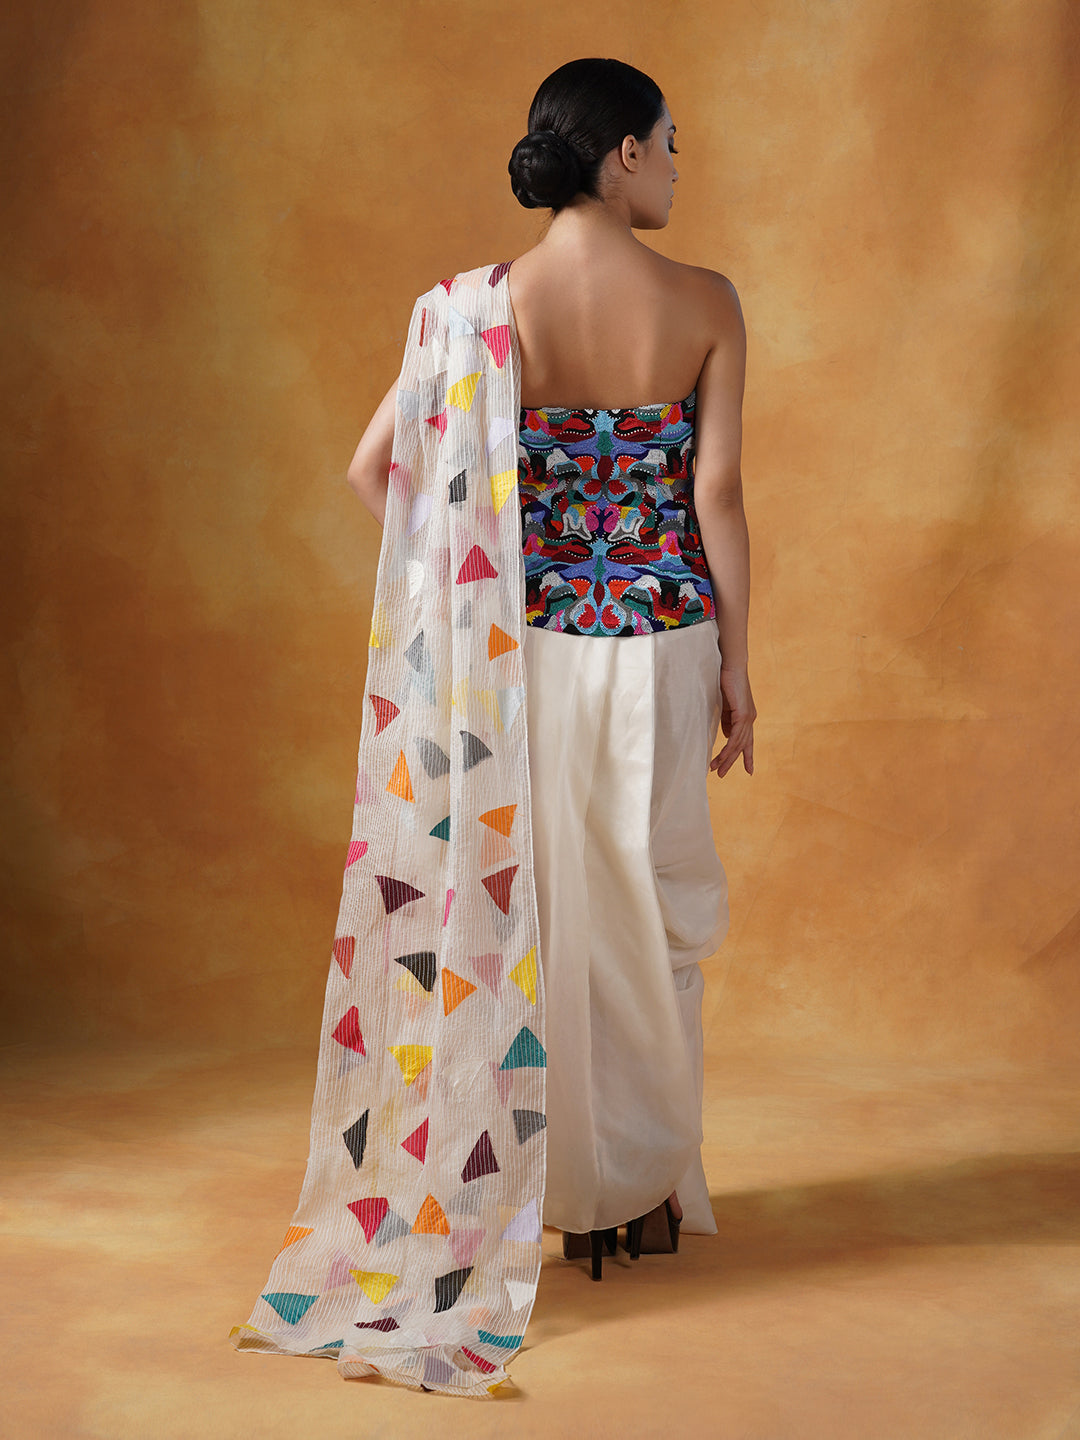 Corset that is intricately embroidered in colorful beads, decorated wi –  samantchauhan